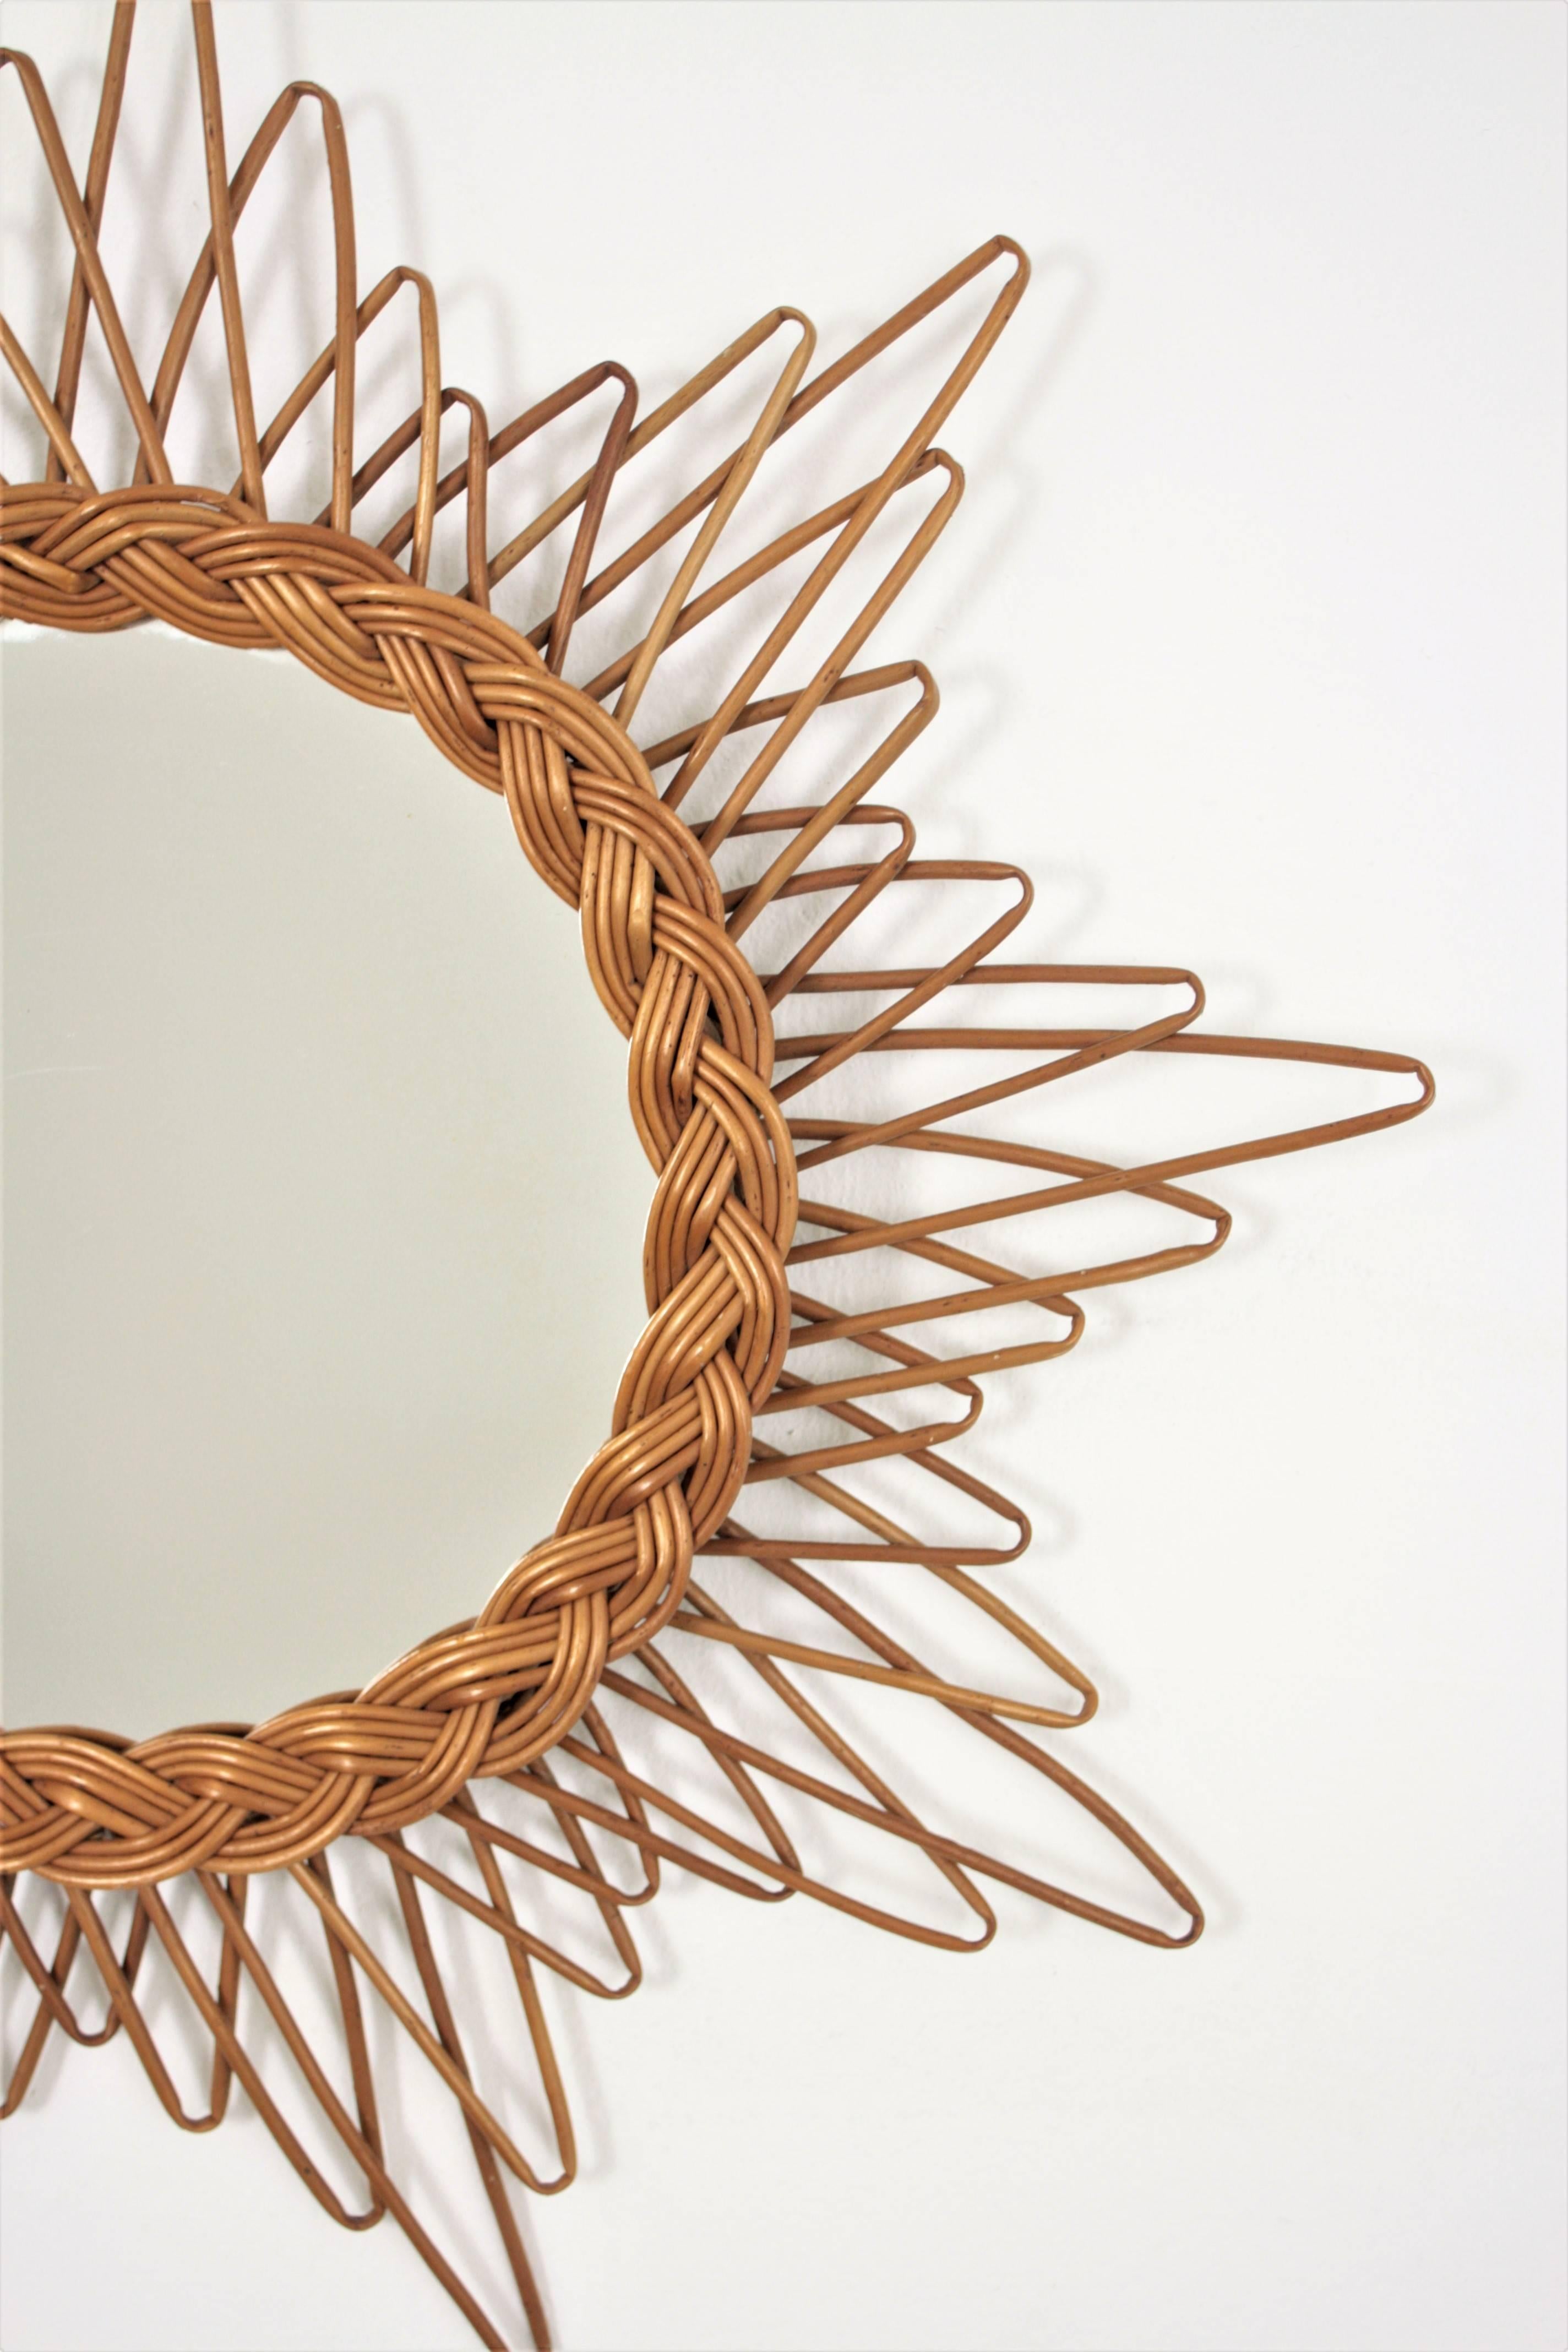 Lovely handcrafted rattan mirror with starburst or sunburst shape.
Beautiful placed alone but also perfect to create a wall decoration with mirrors in this manner. This piece has all the taste of the French Riviera style and it is in excellent